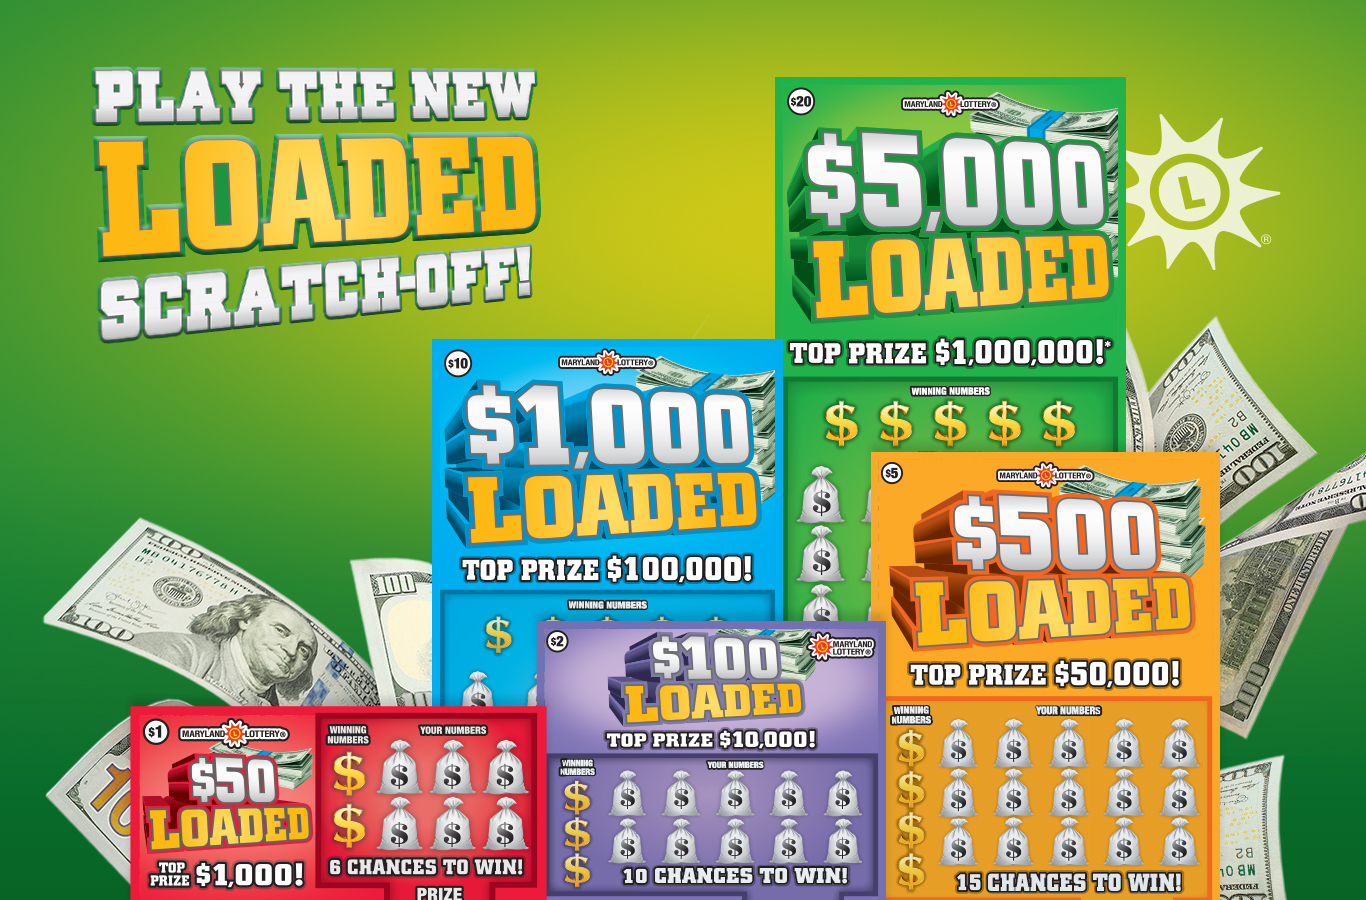 With top prizes up to $1 MILLION, the LOADED Scratch-Offs are LOADED with chances to win all kinds of cash!